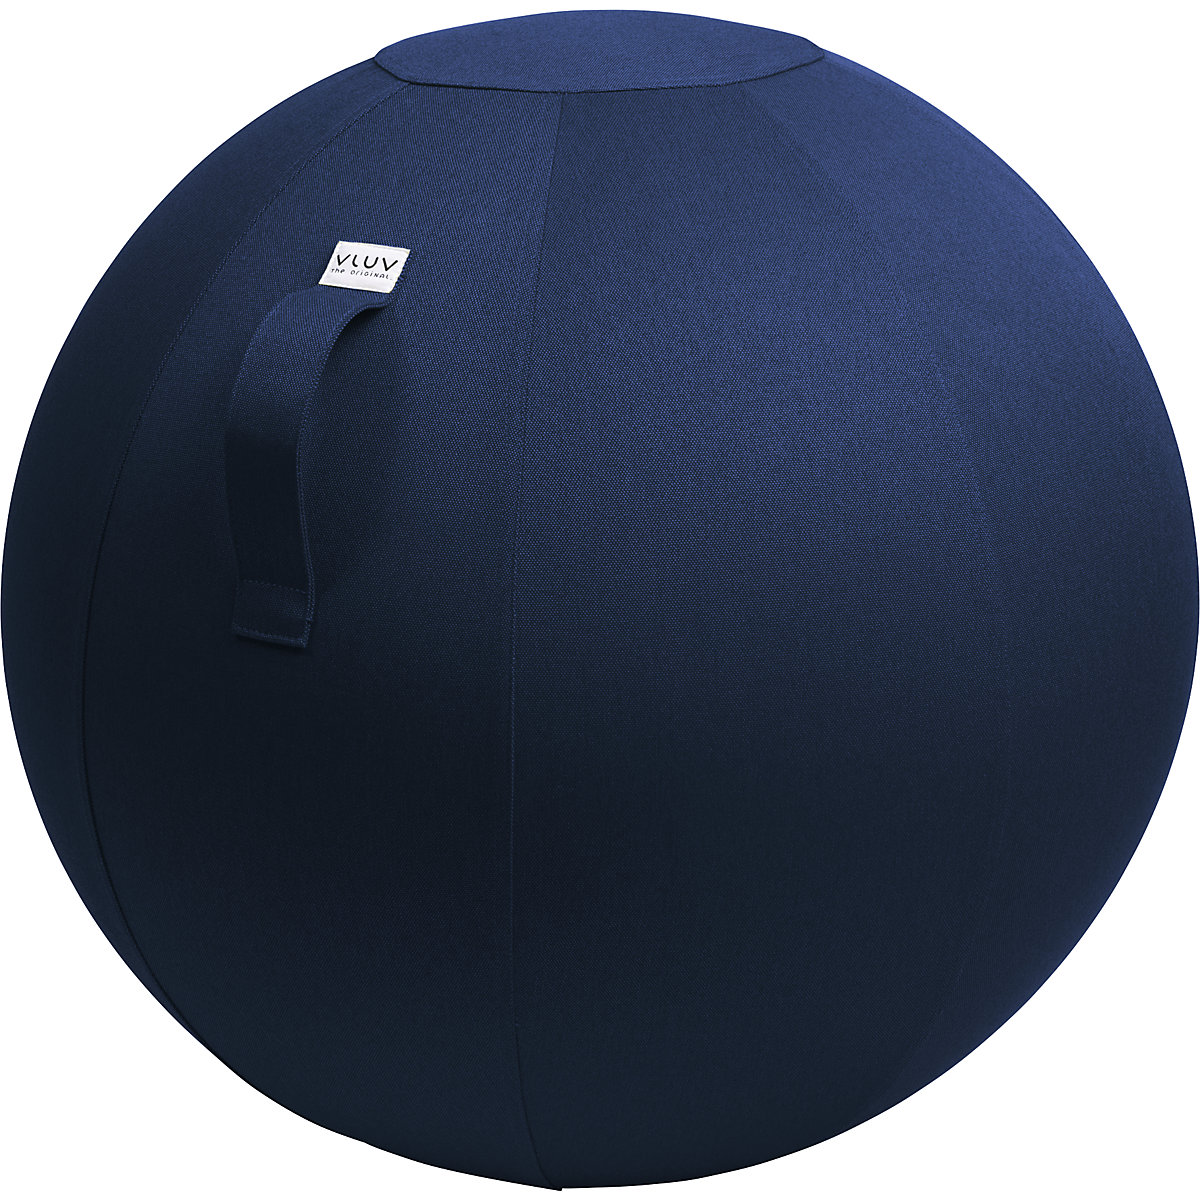 LEIV Swiss ball – VLUV, fabric cover with the appearance of canvas, 600 – 650 mm, royal blue